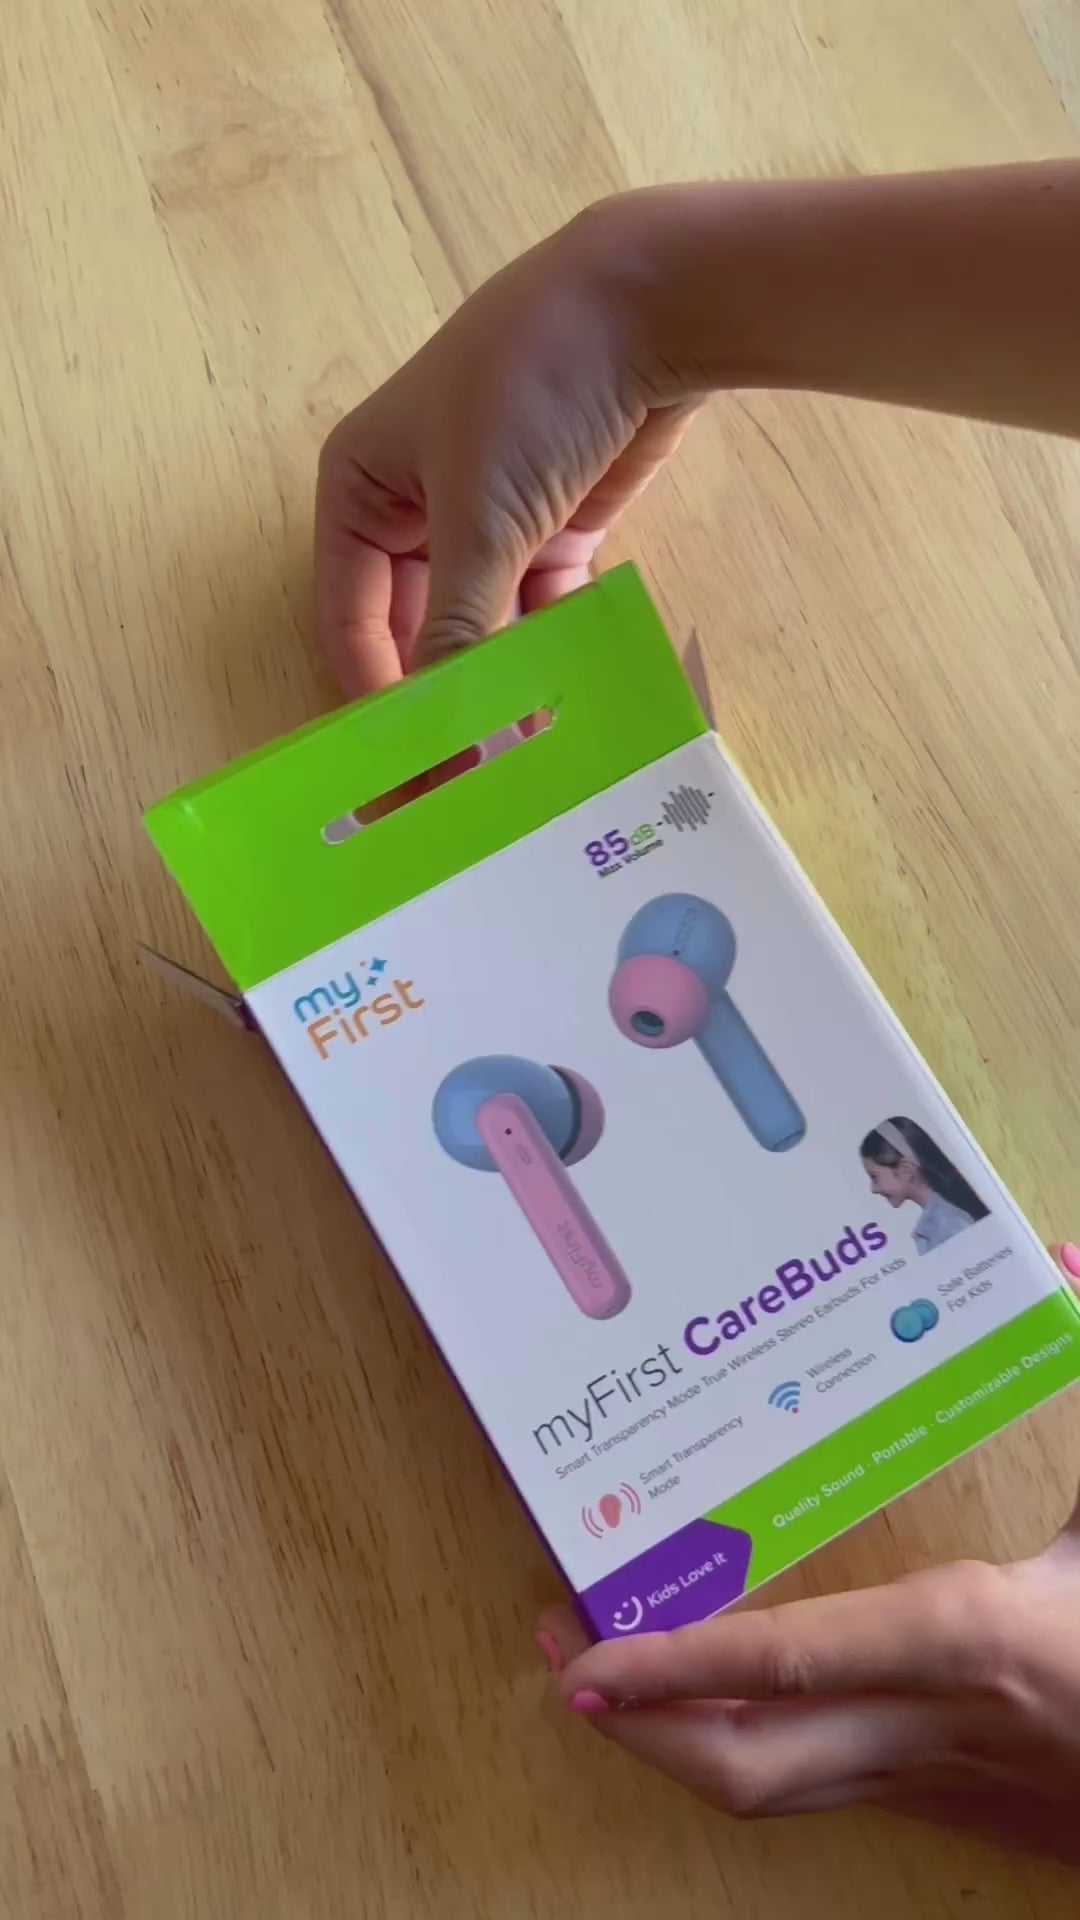 video of unboxing carebuds earbuds for kids